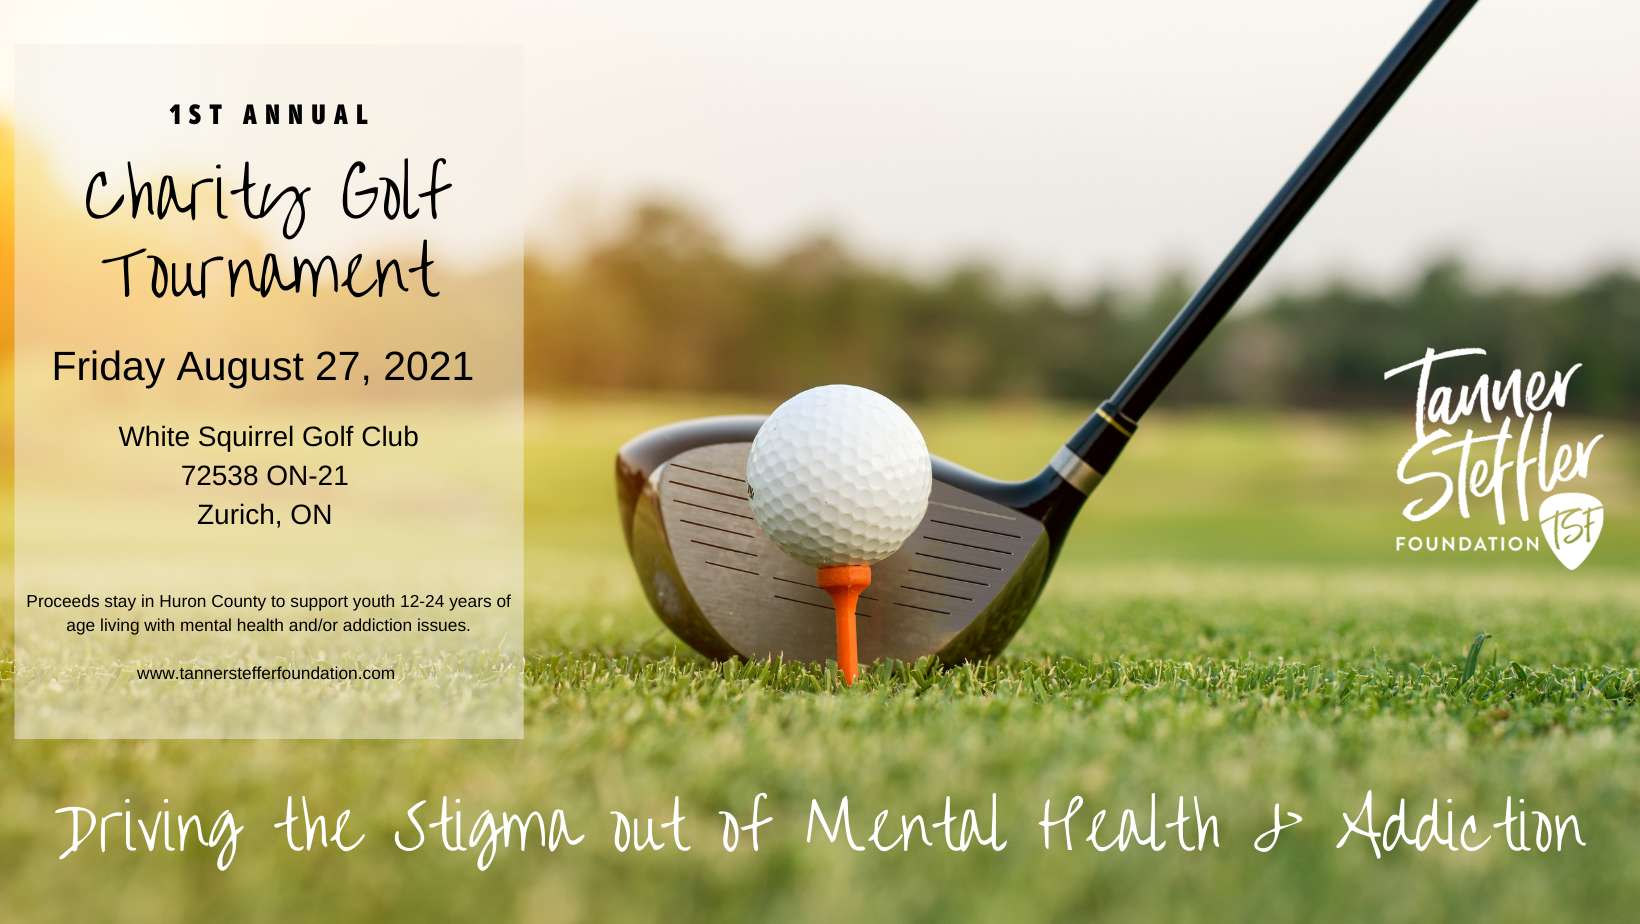 Driving the Stigma out of Mental Health & Addiction Charity Golf Tournament